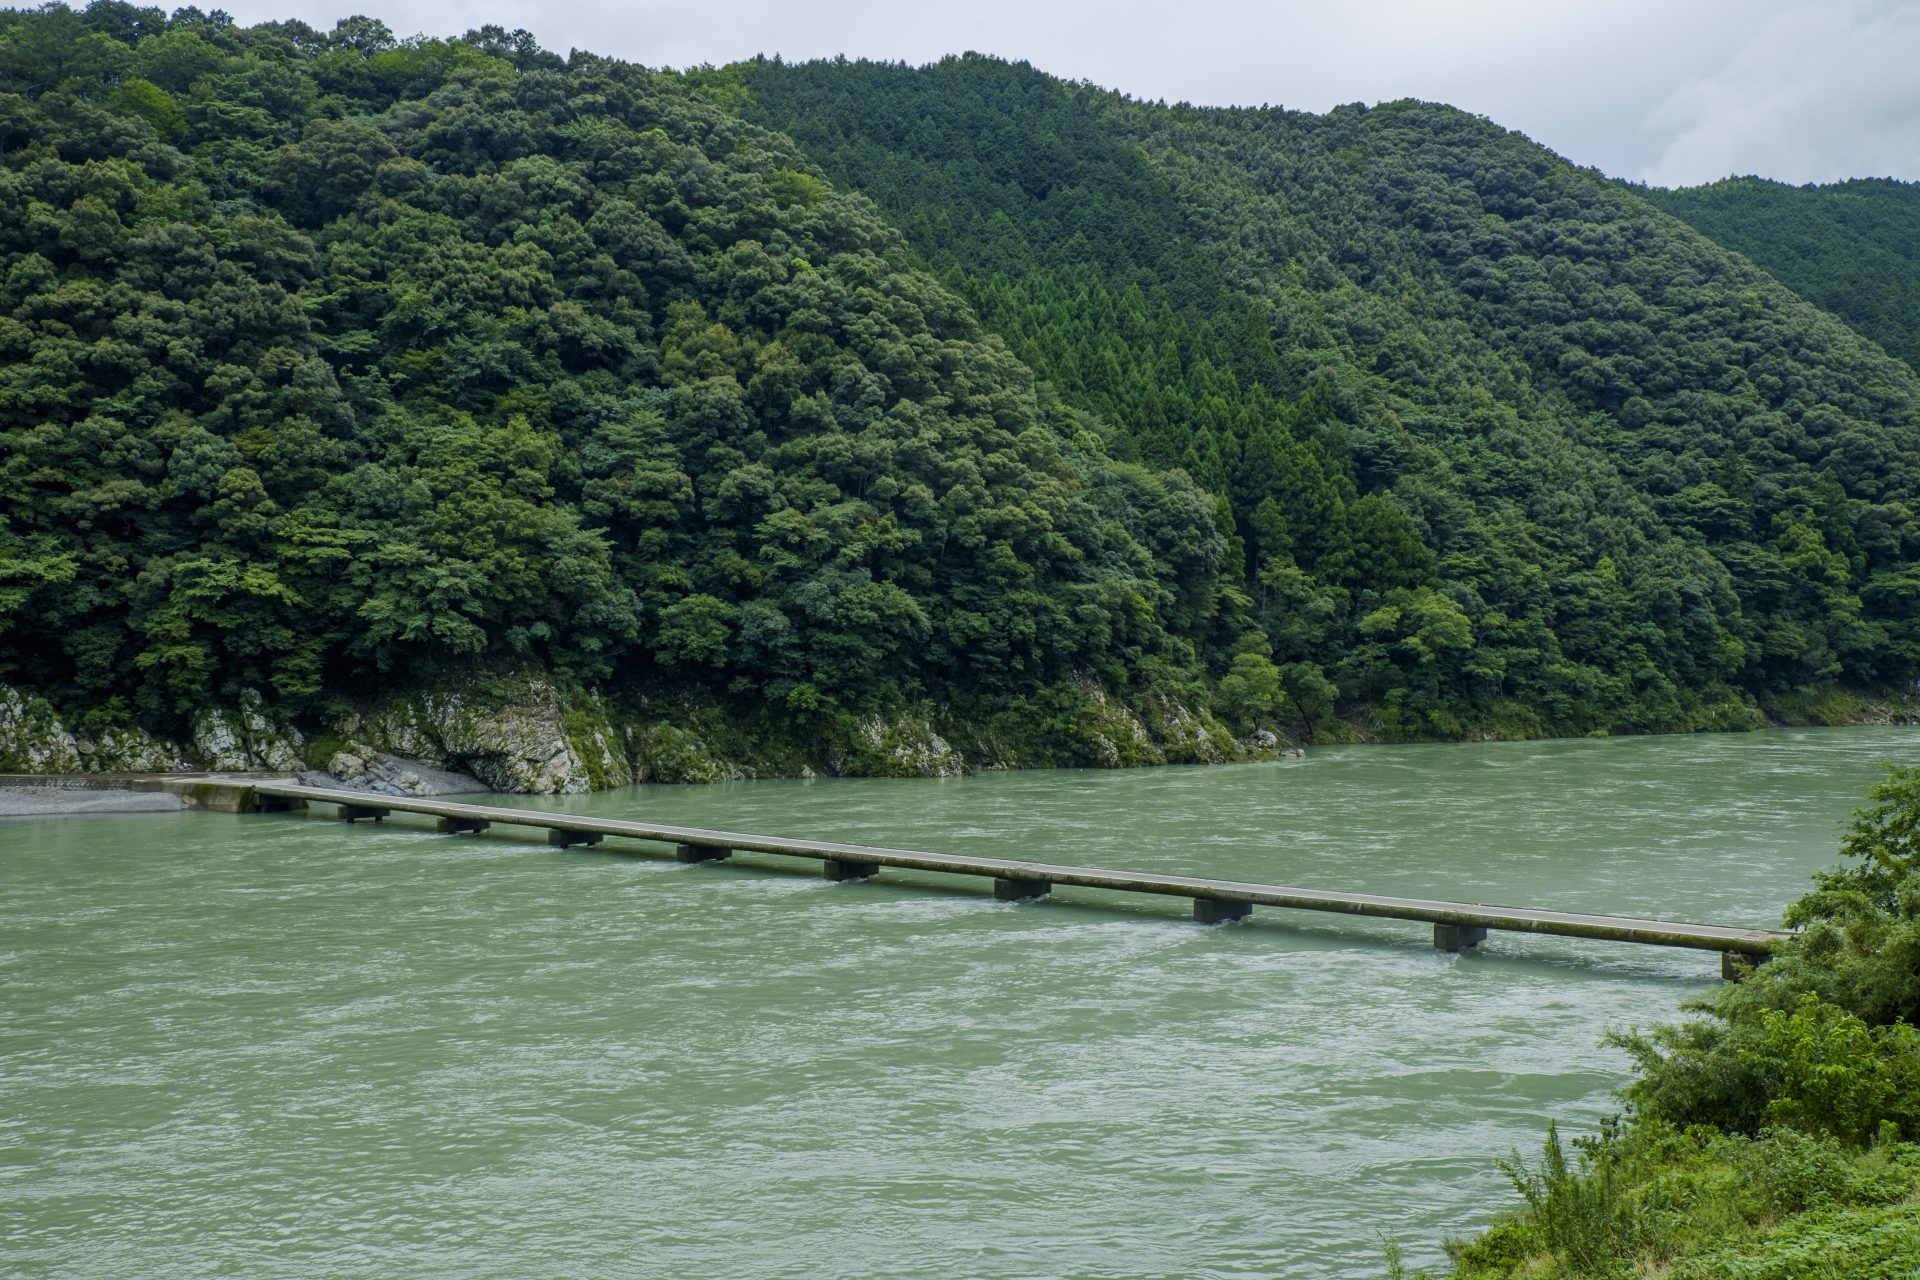 <p>The Shimanto River is the longest in Shikoku and has 47 bridges without handrails called submerged bridges. They have been designed with the assumption that they will sink directly into the river when the water rises. Their hanging construction makes them less susceptible to water resistance and floating items such as driftwood.</p>